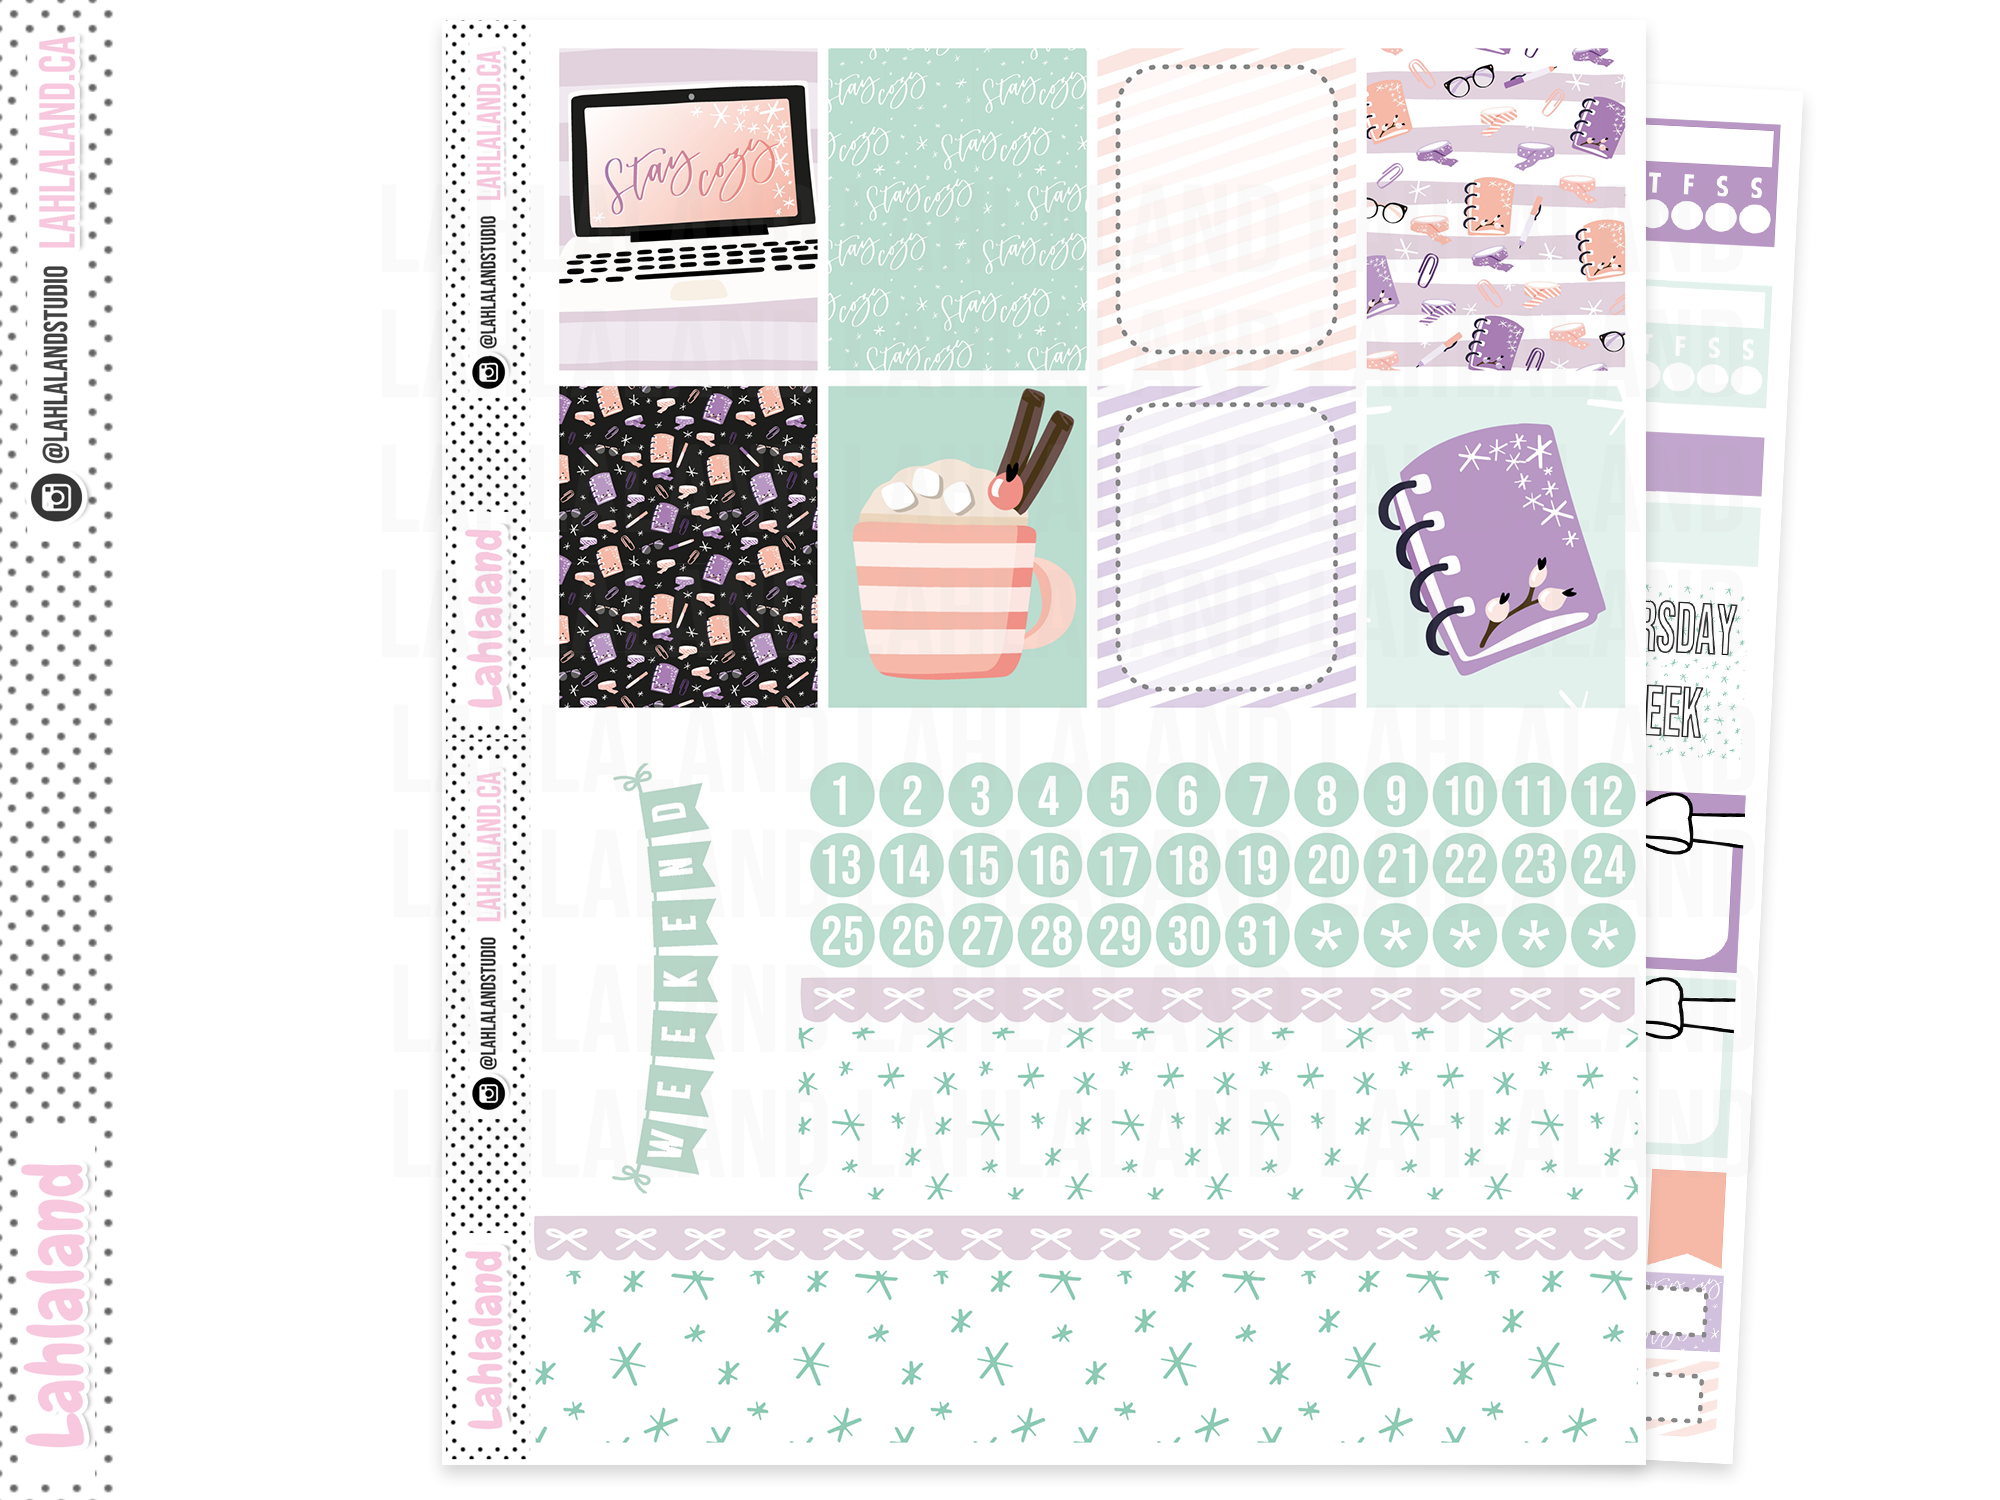 Standard Vertical, Classic Happy Planner - Cozy Office Weekly